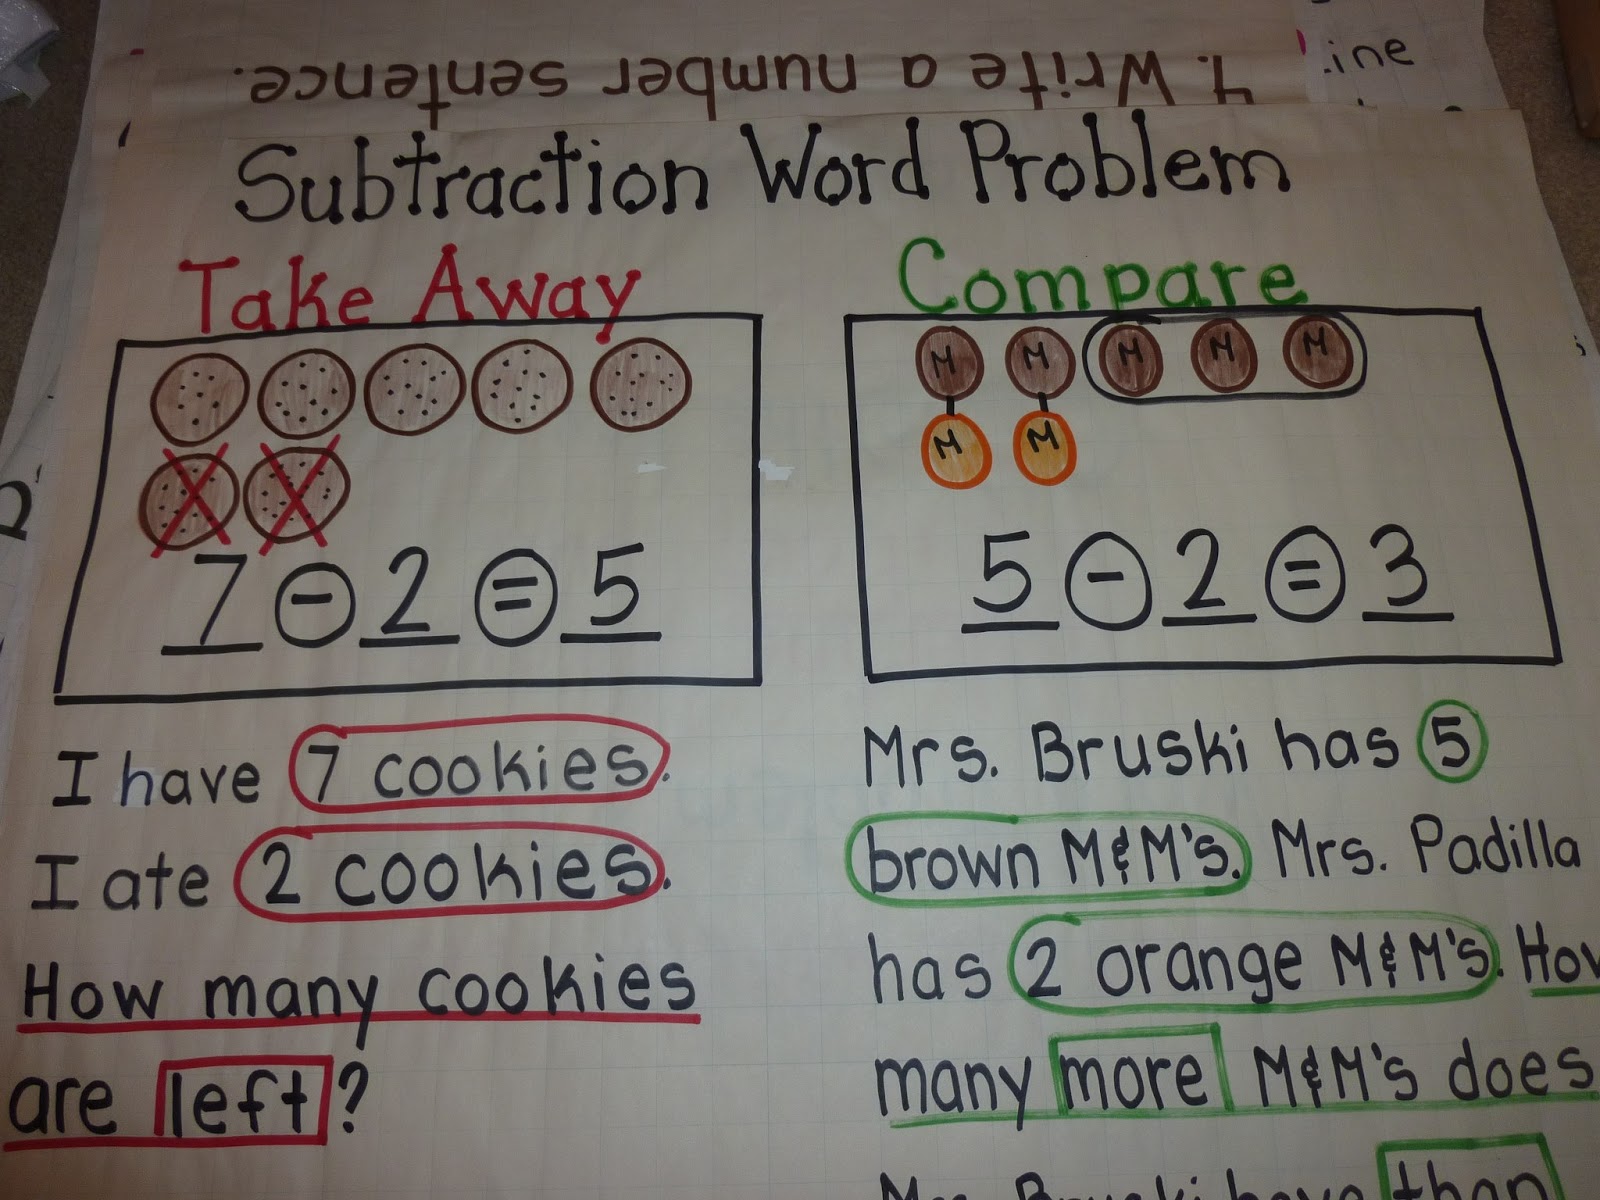 Addition And Subtraction Words Anchor Chart